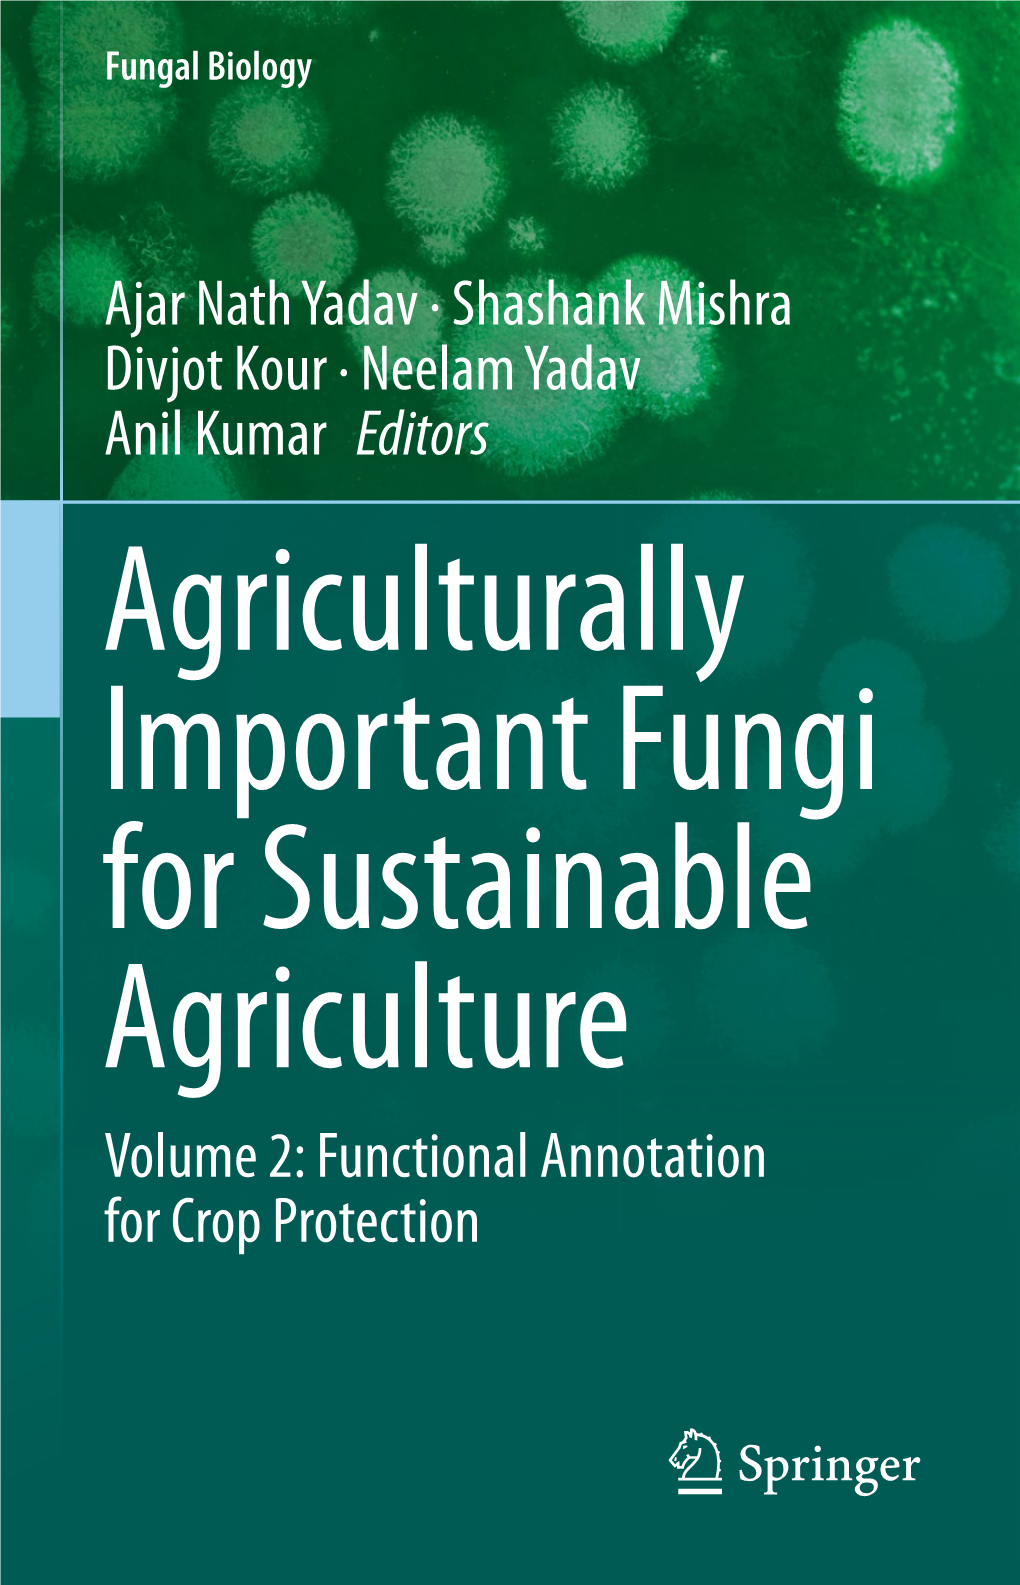 Agriculturally Important Fungi for Sustainable Agriculture Volume 2: Functional Annotation for Crop Protection Fungal Biology